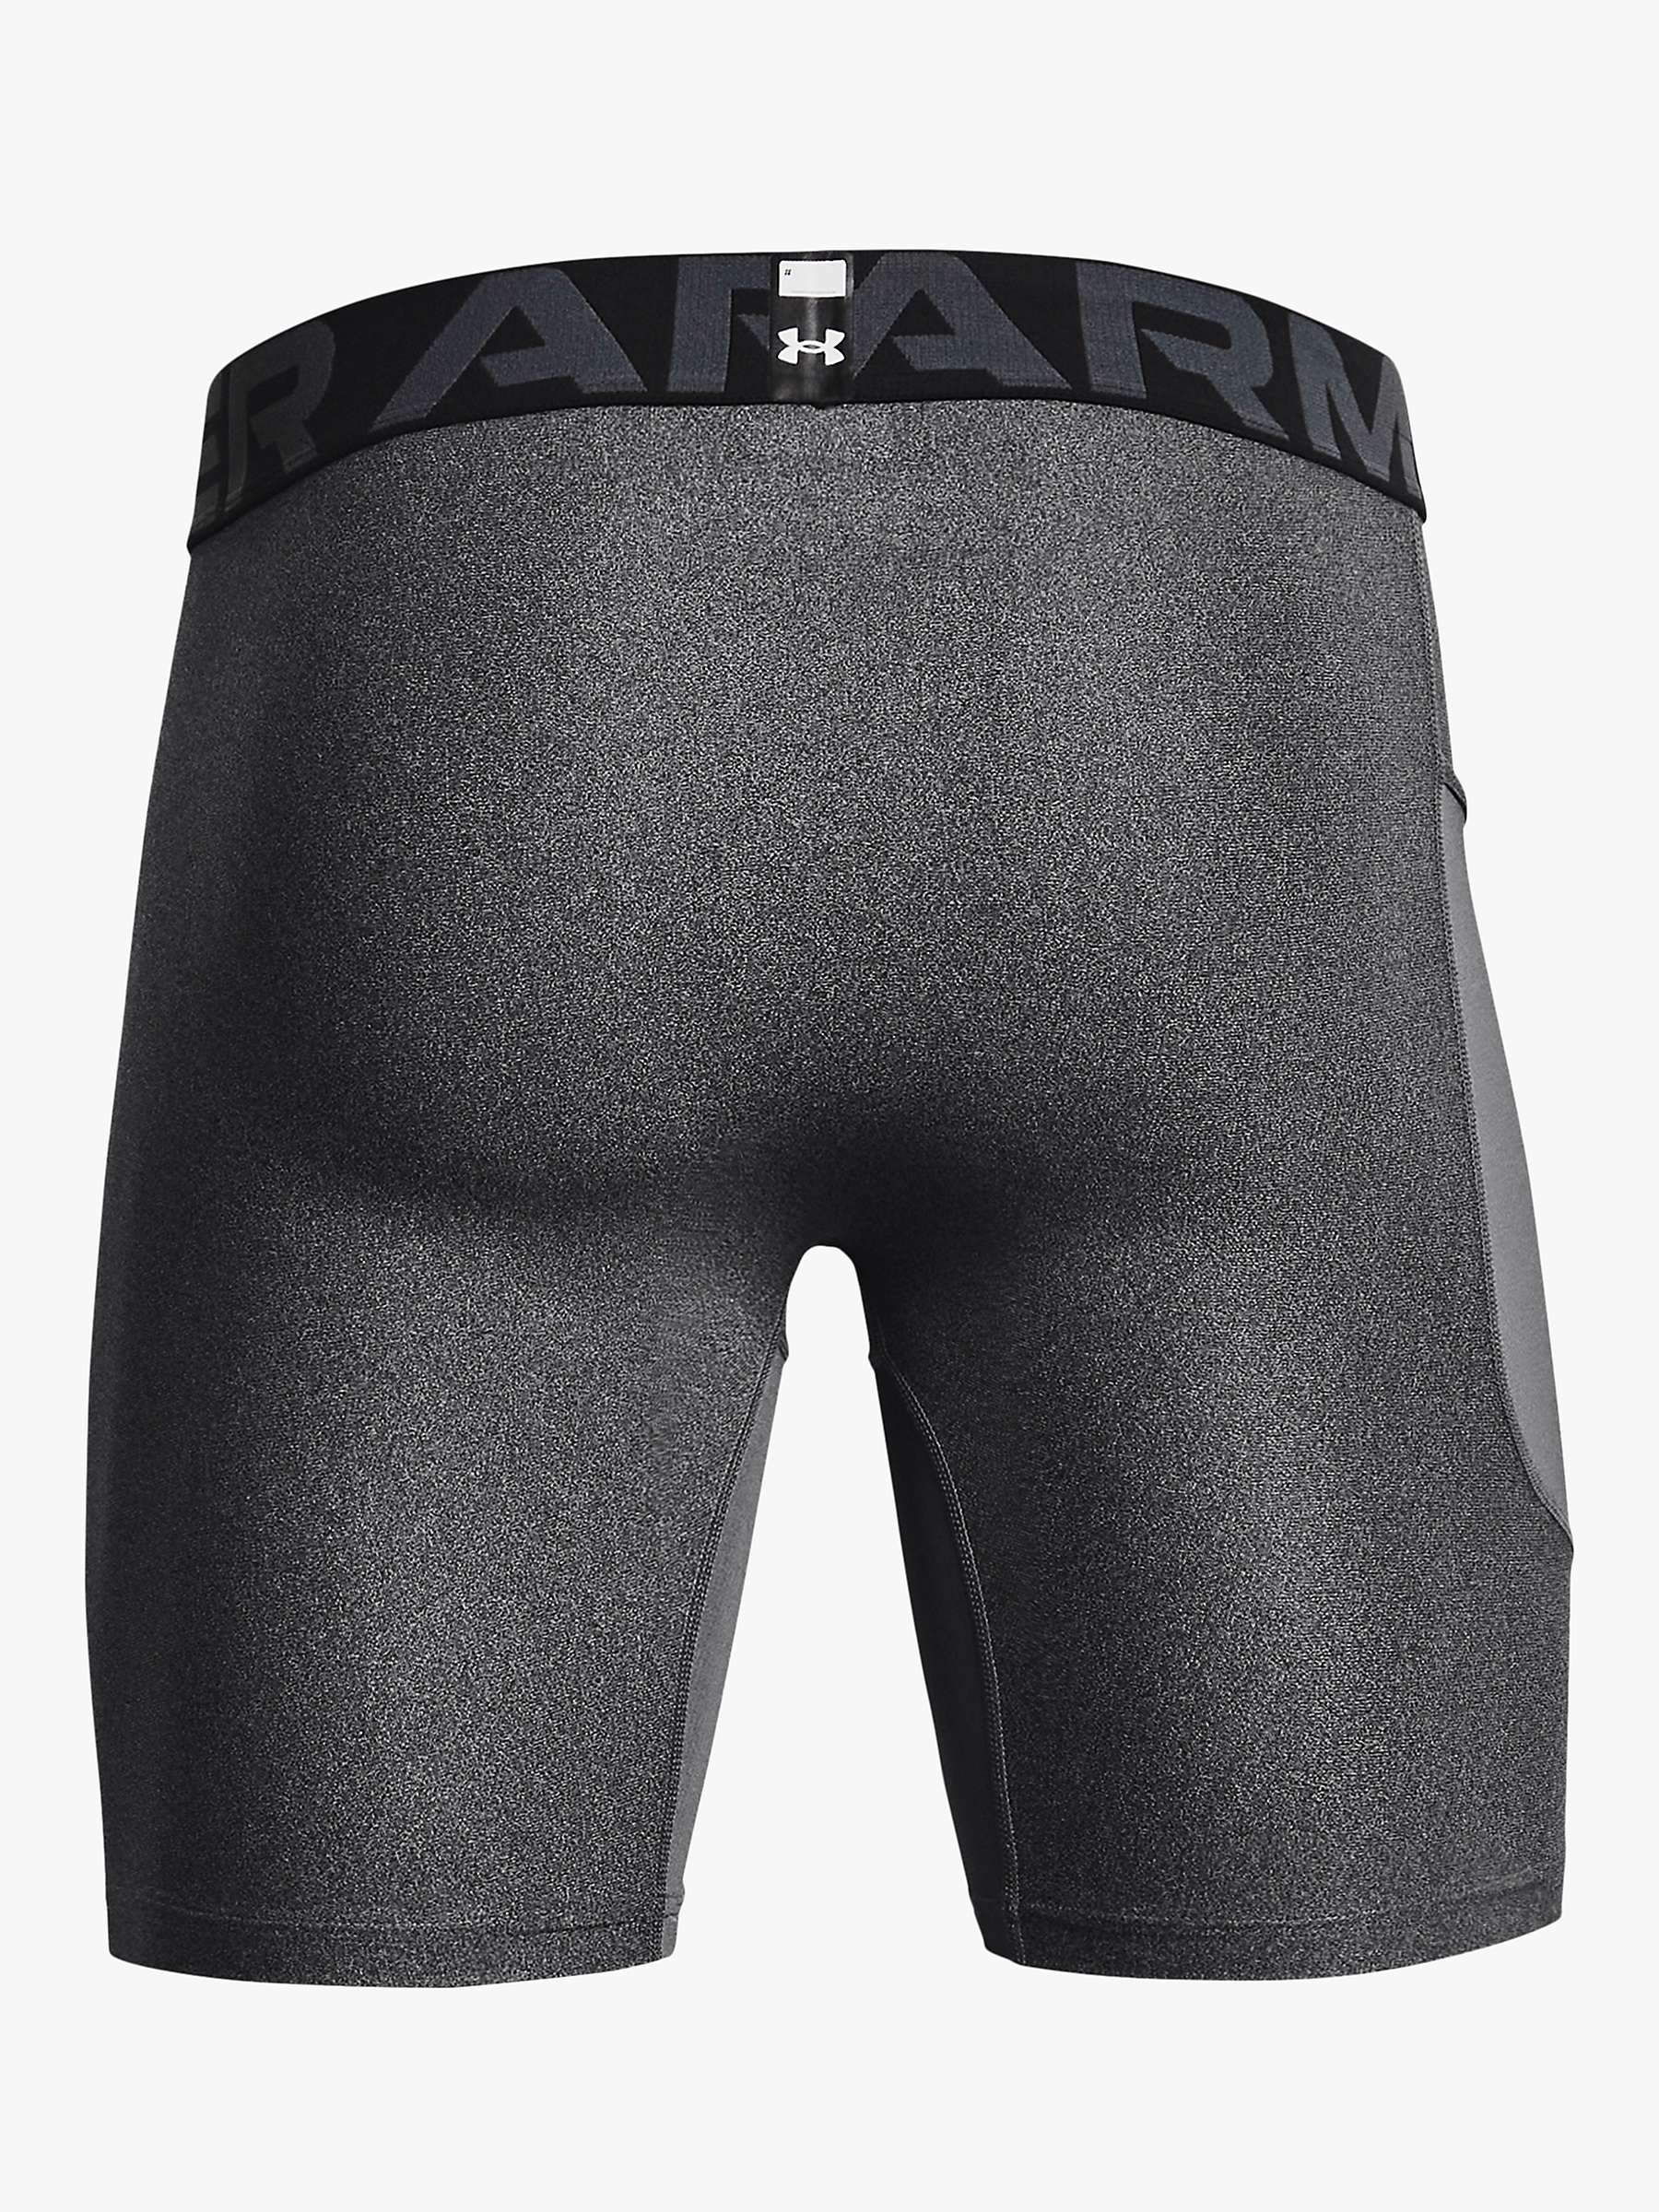 Buy Under Armour HeatGear Armour Compression Shorts Online at johnlewis.com